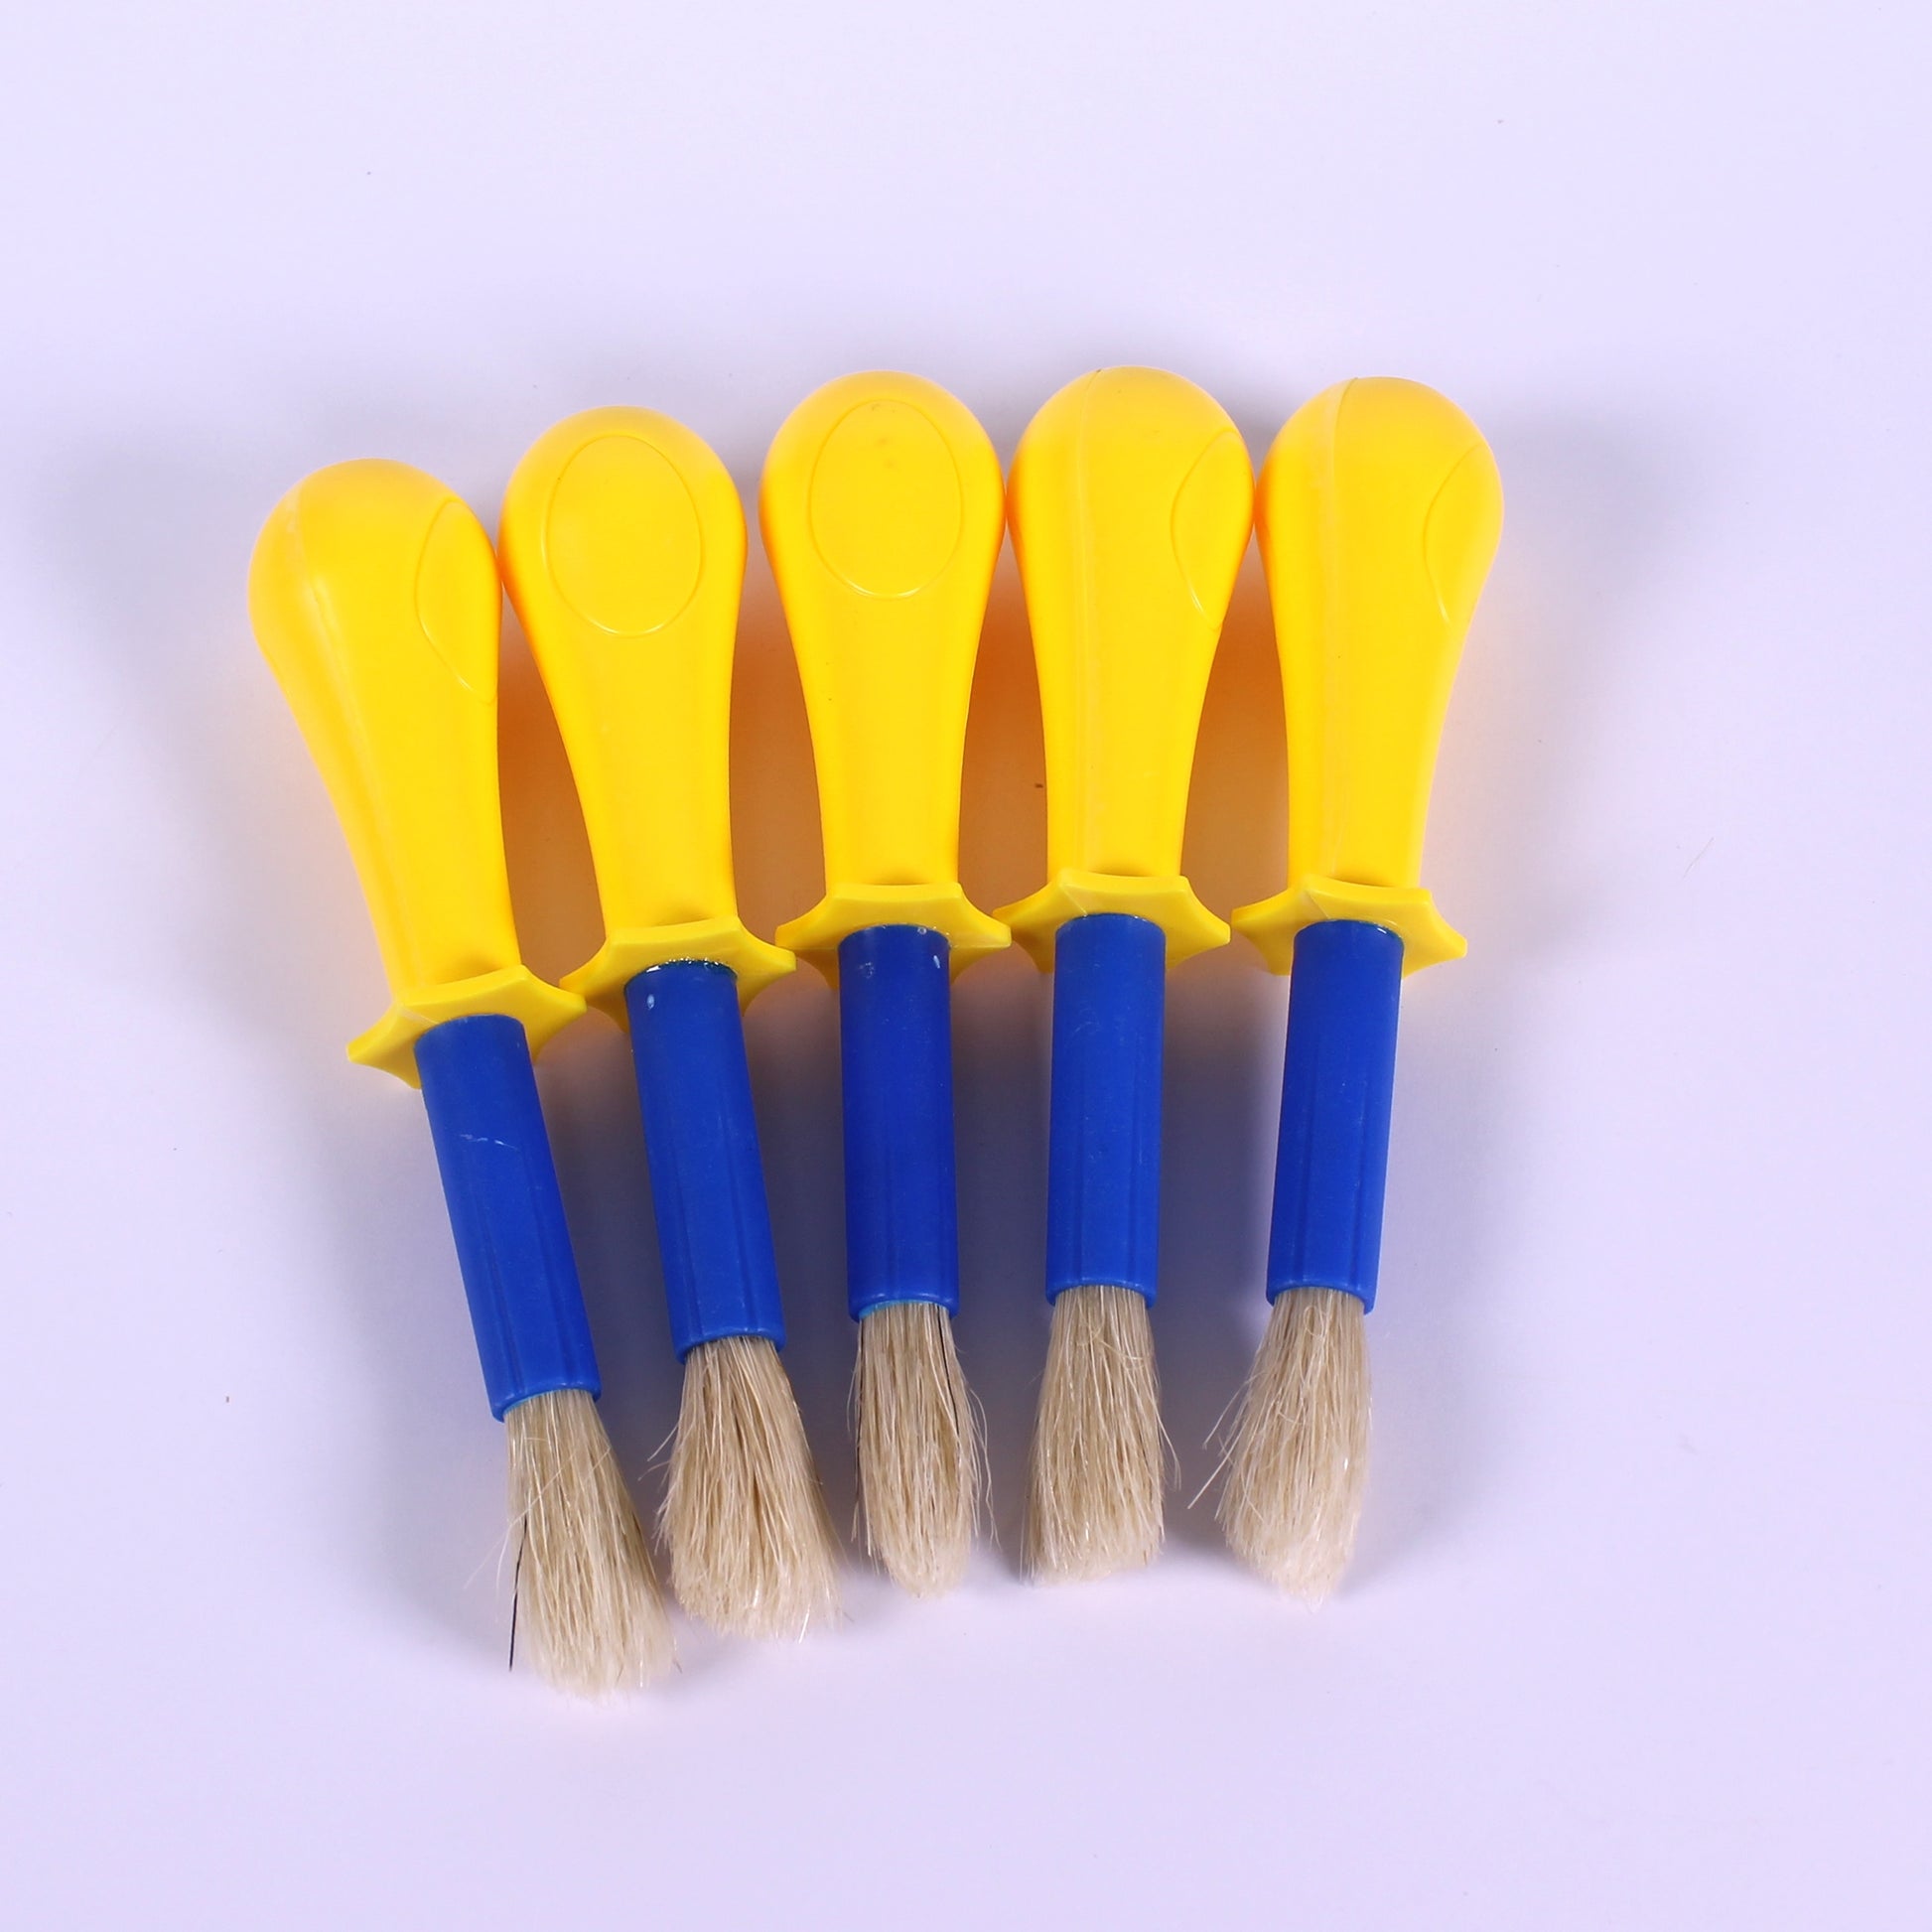 Toddler Paint Brushes 24 Pack, Hog Bristle Round and Flat Preschool Paint Brushes for Washable Paint Acrylic Paint, Size: Large